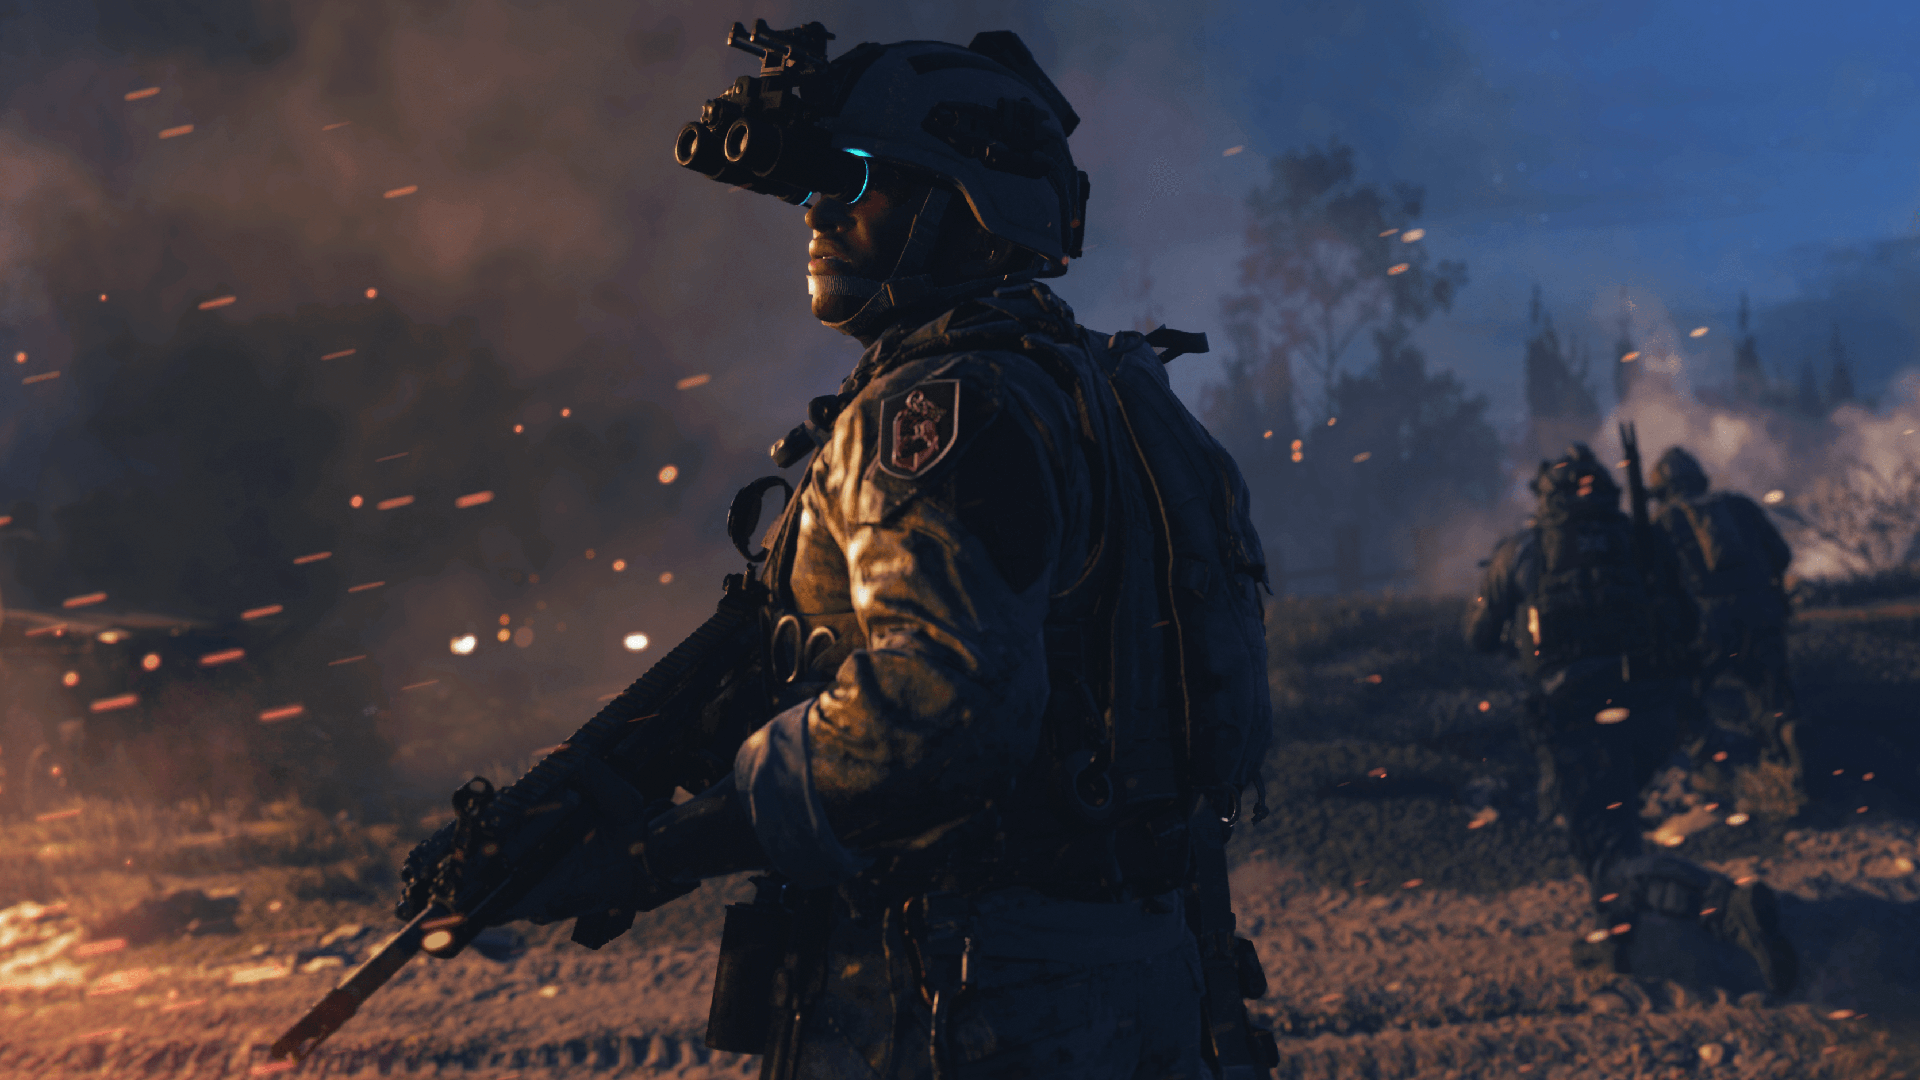 Call of Duty: Vanguard review: a solid installment with a satisfying story  and great multiplayer